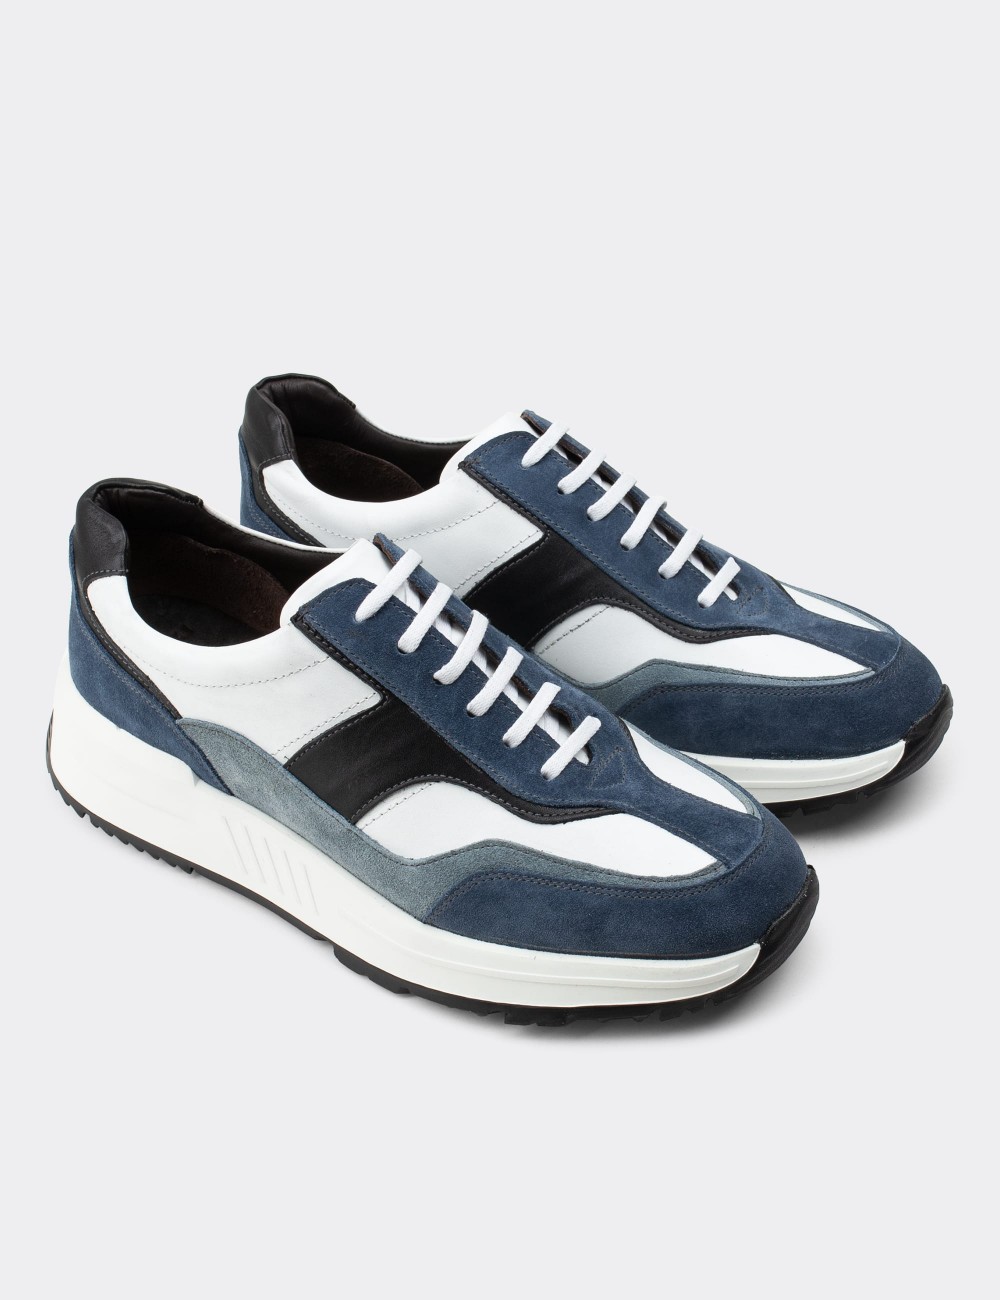 Blue  Leather Sneakers - 01889MBYZE01